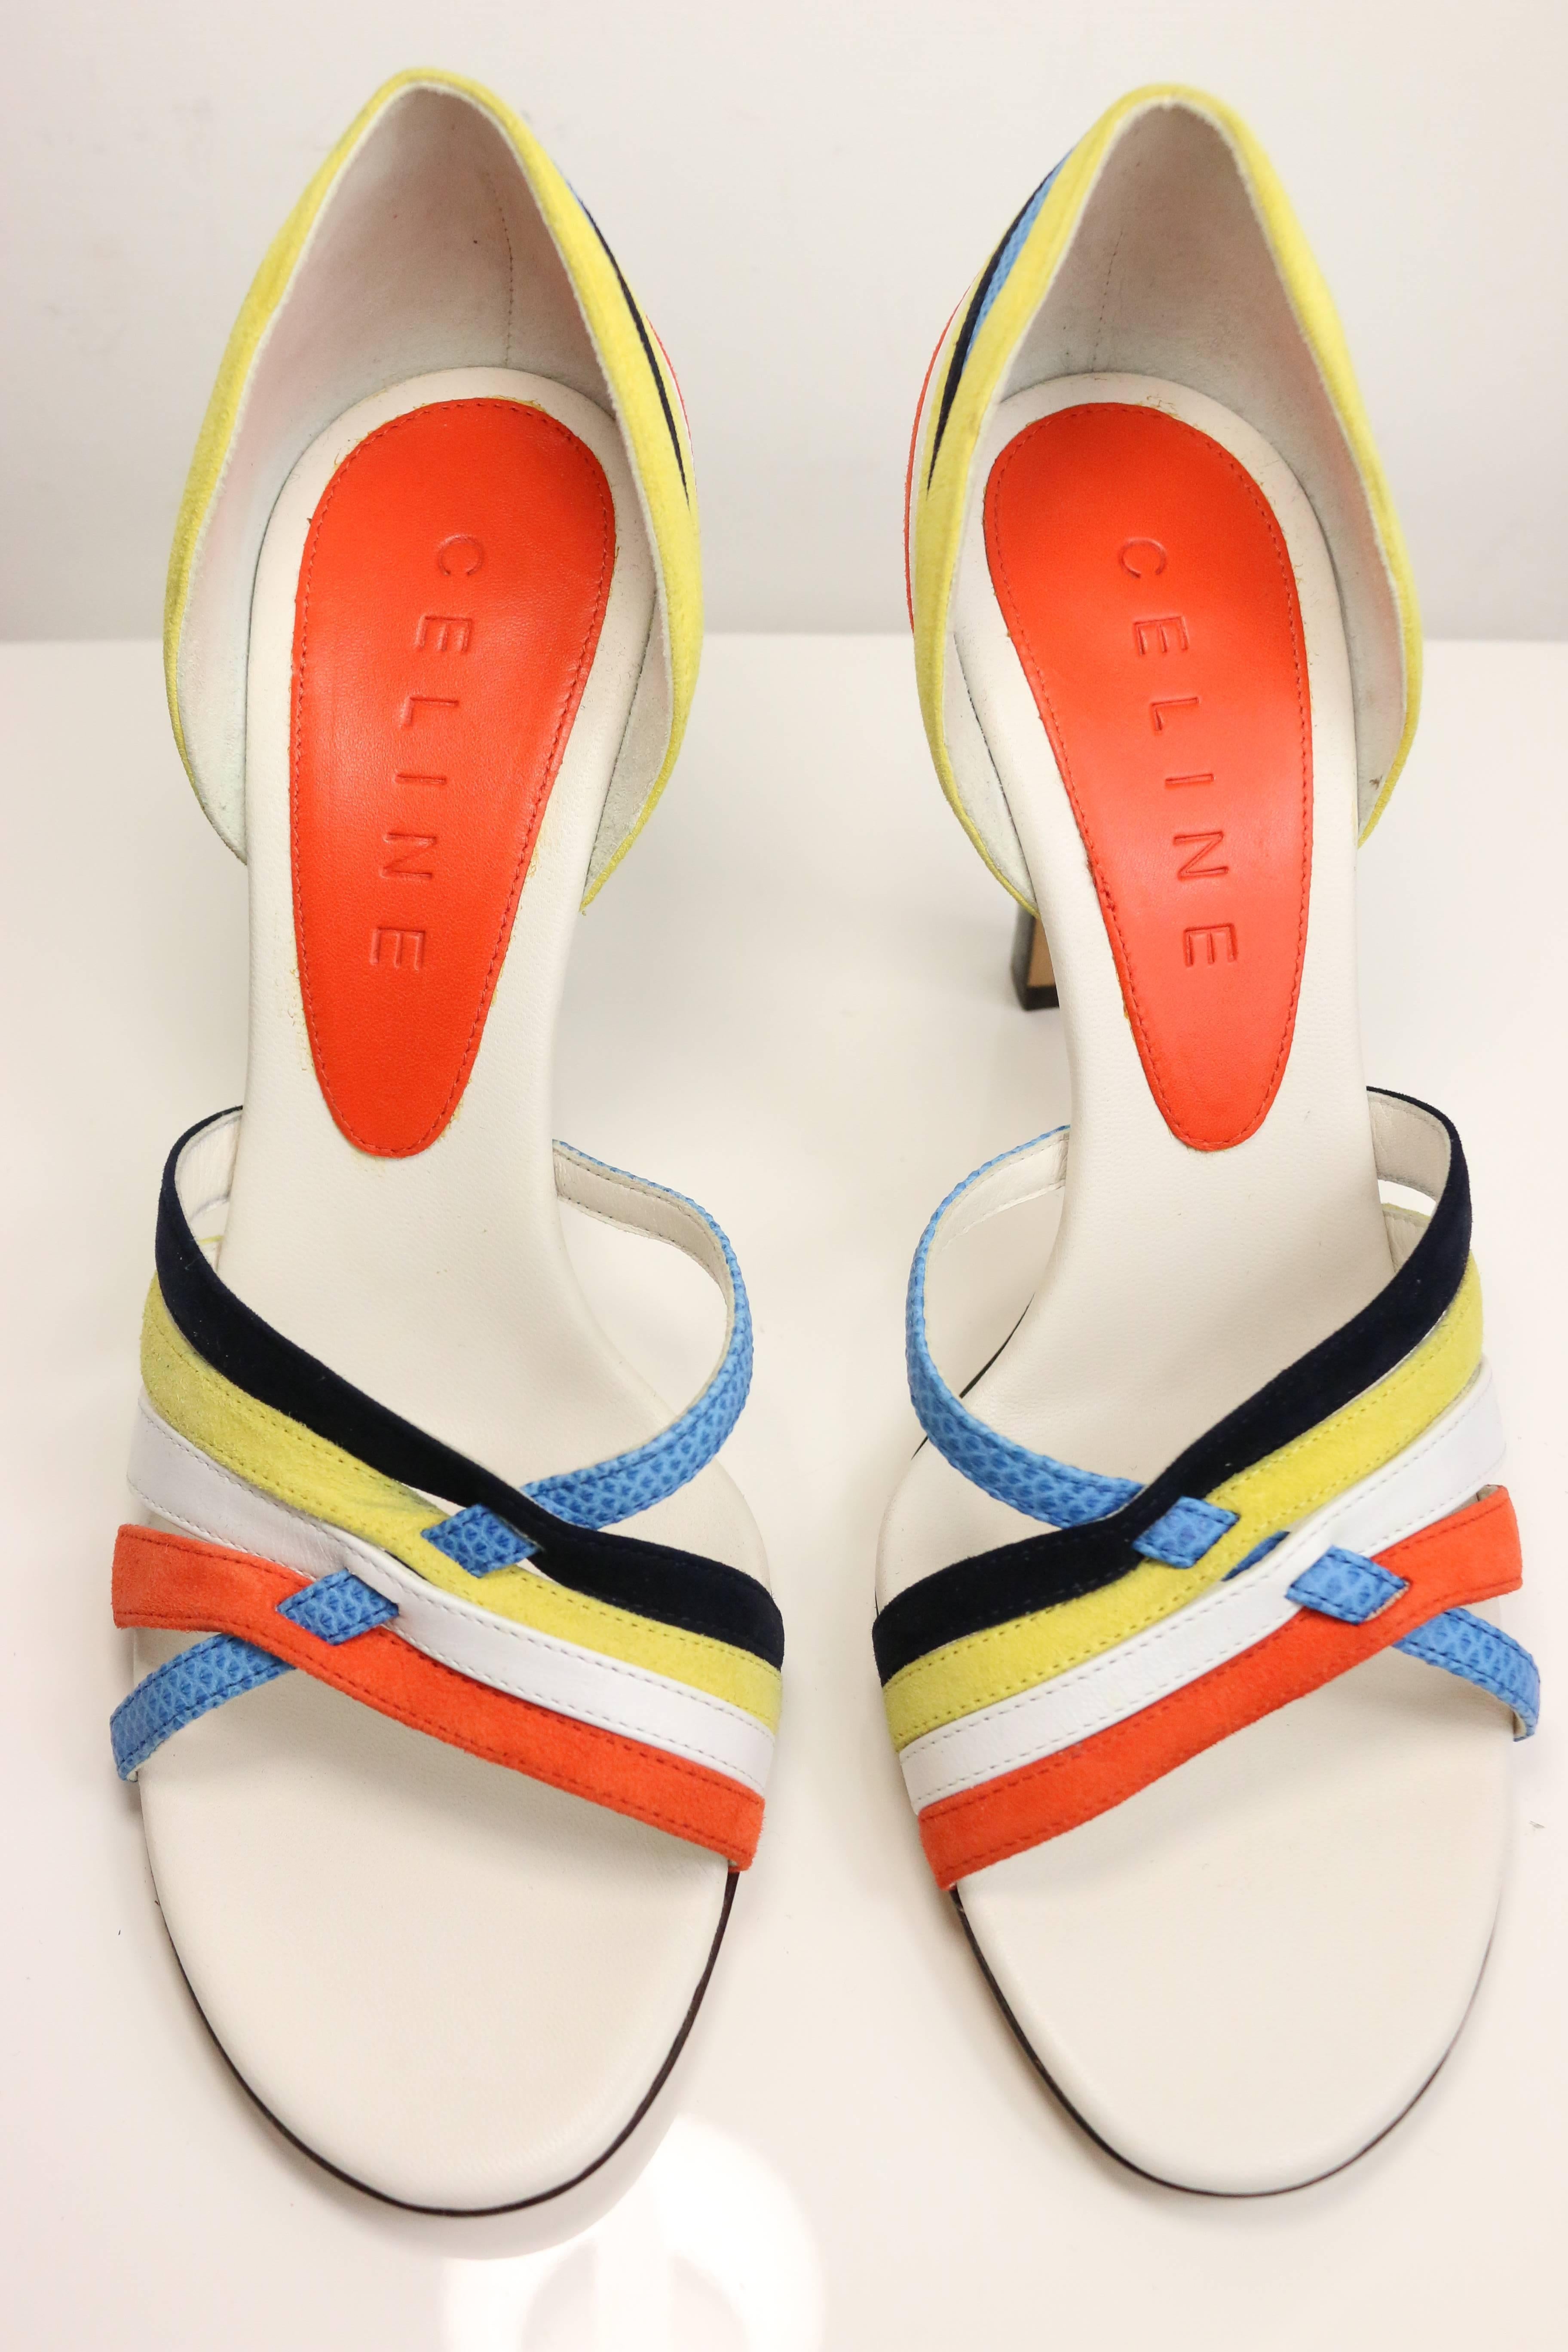 - Celine colour blocked suede orange/yellow/black straps,  leather white strap and snakeskin leather blue strap sandals with wood heels. 

- Size 38.5. 

- Made in Italy. 

- Long: 8in I Heels: 4in.  
